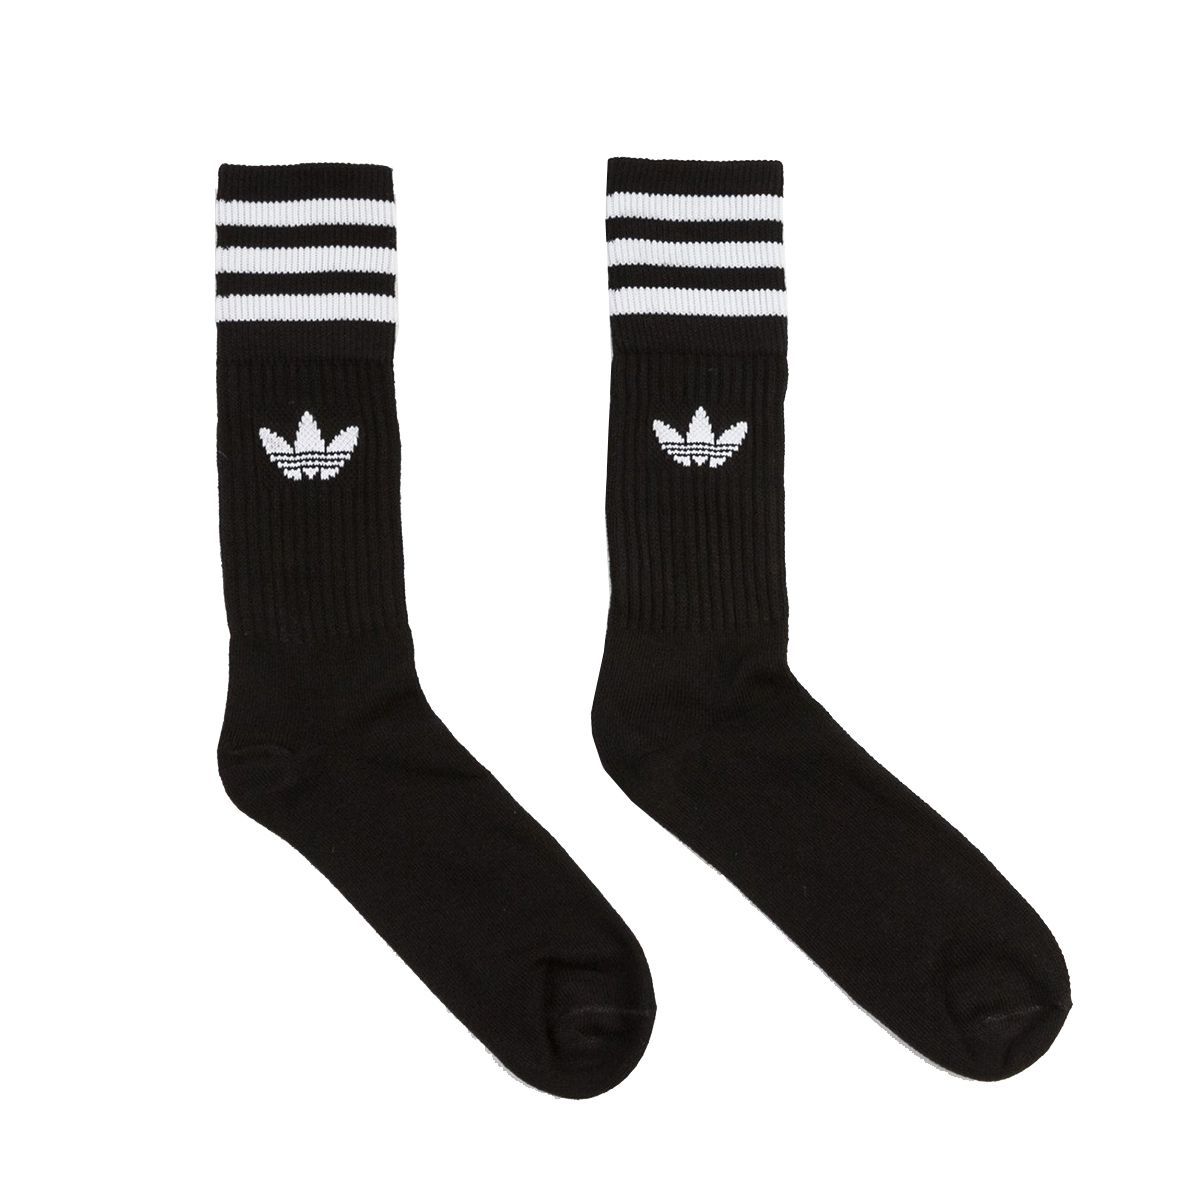 ADIDAS “Solid Crew” 3 Pack high top socks